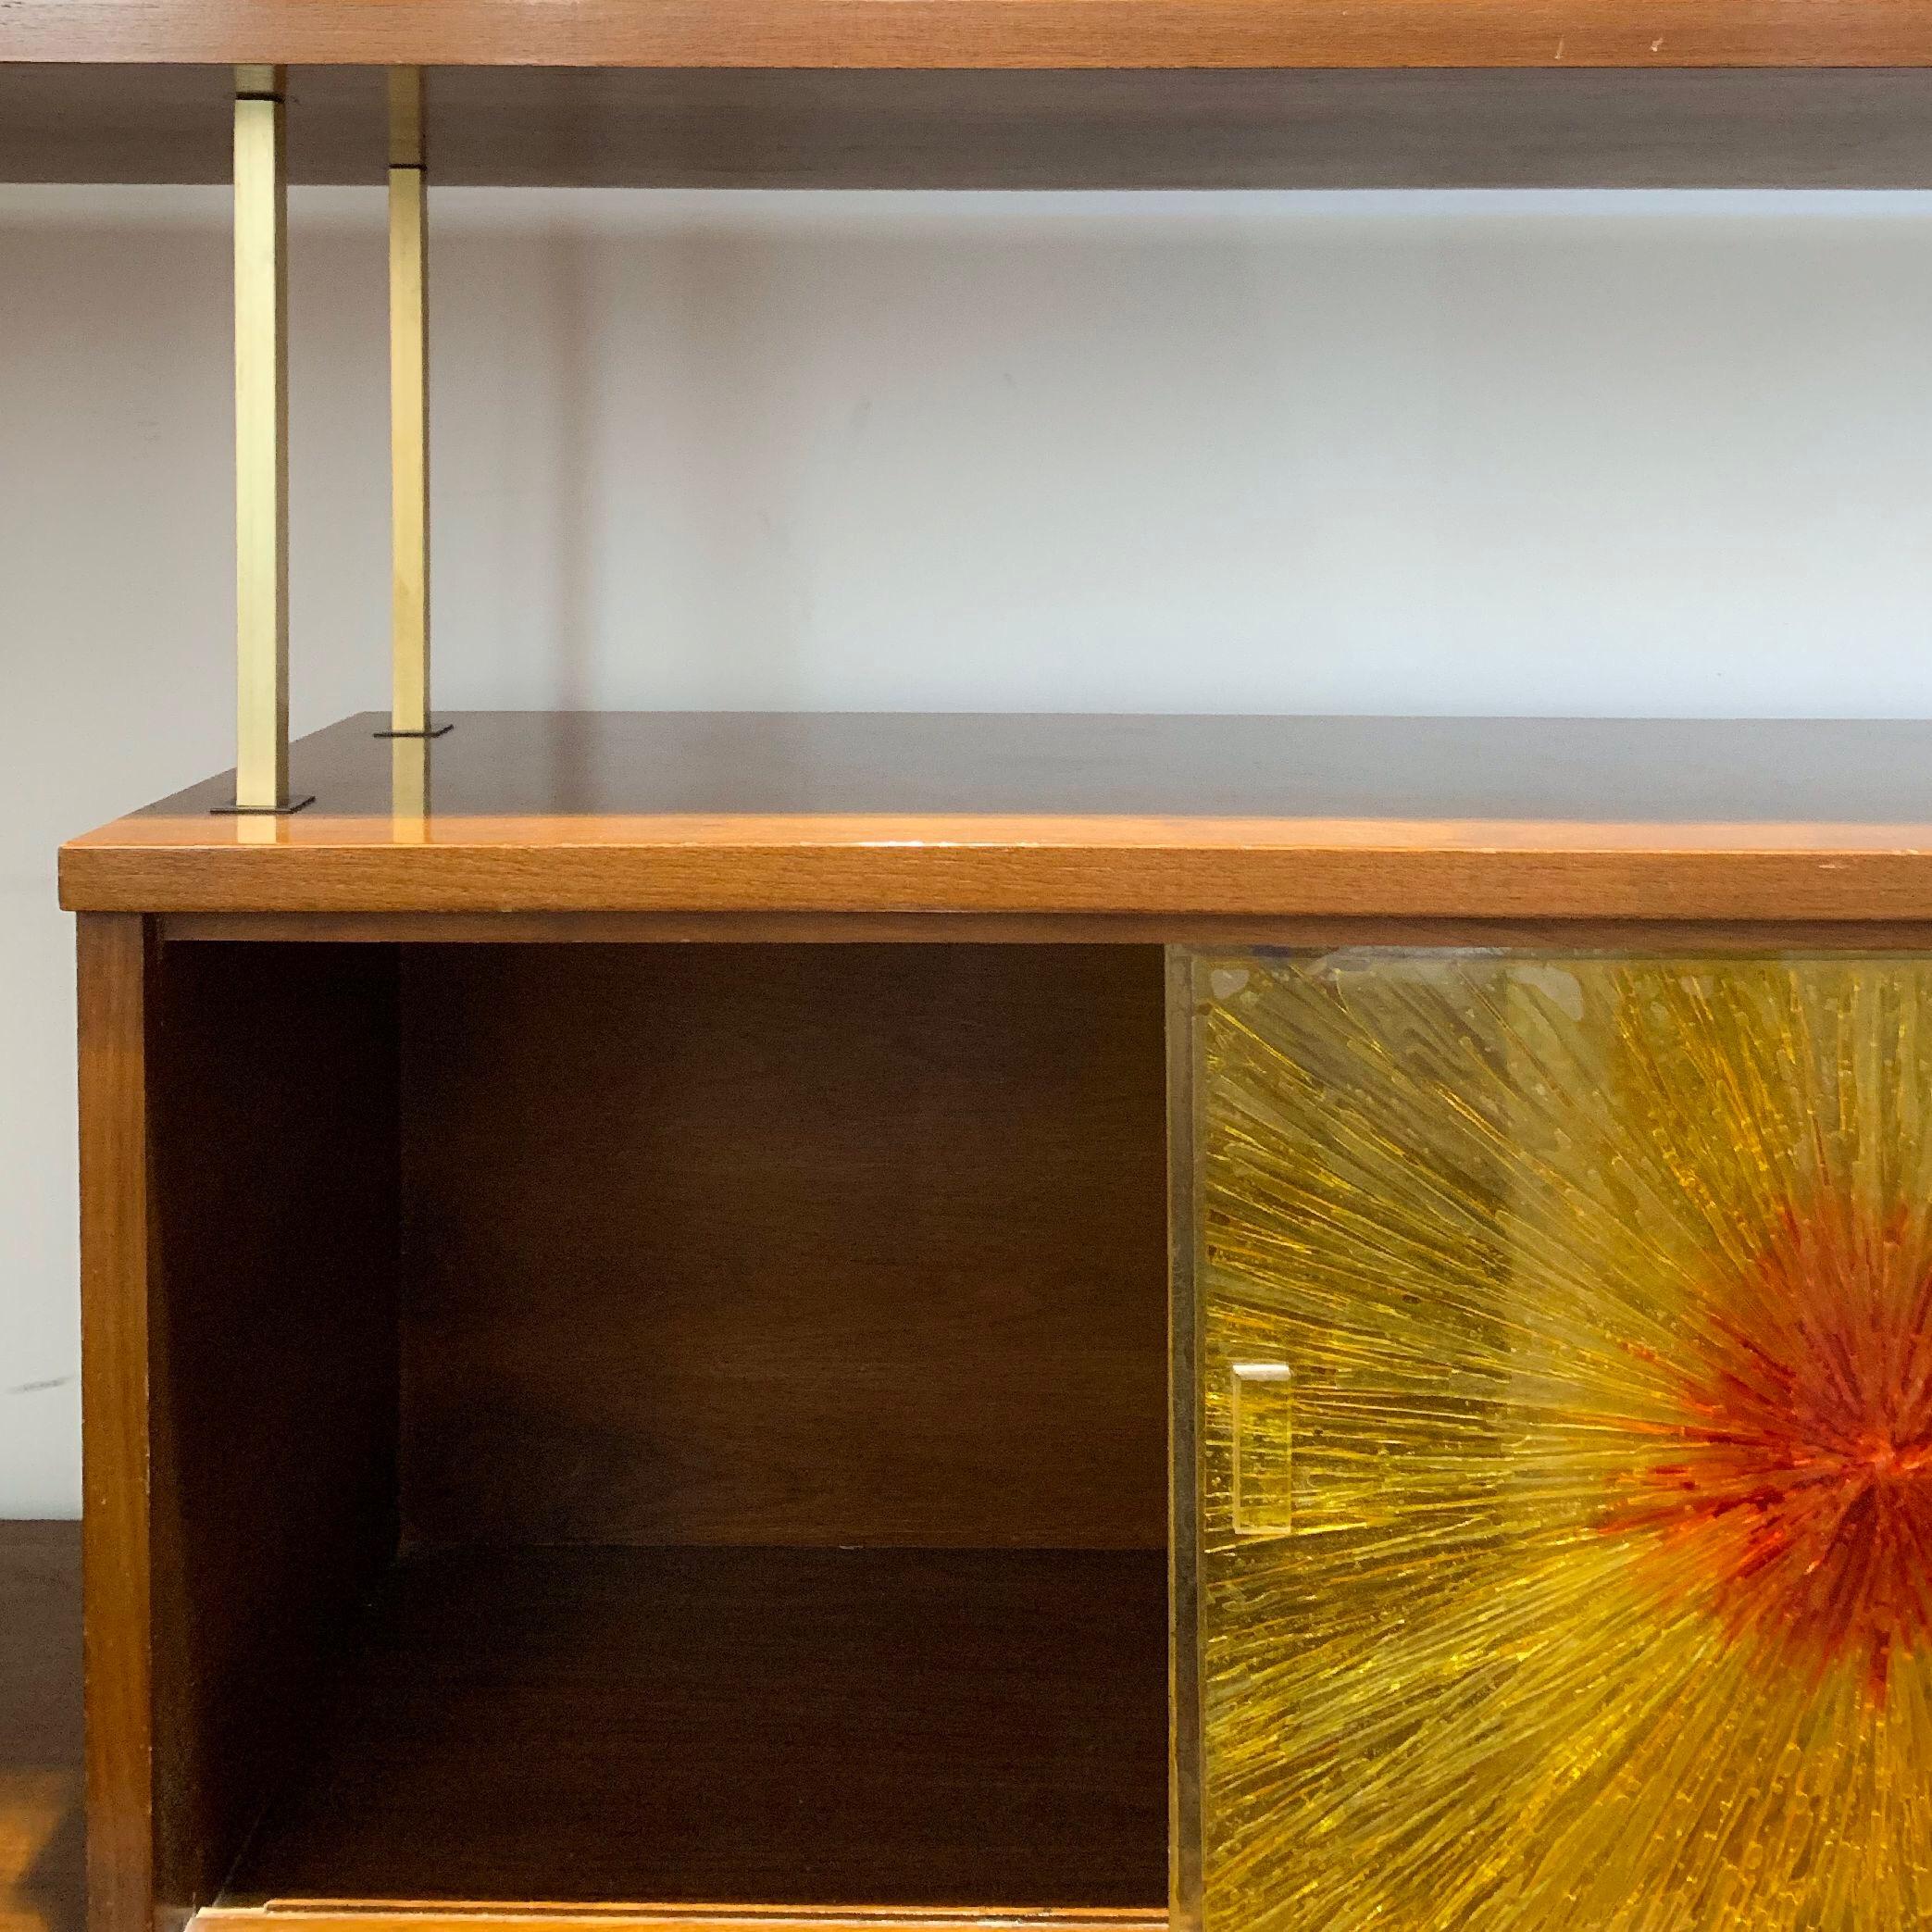 Gorgeous Adrian Pearsall walnut and brass Brutalist Mid-Century Modern étagère bookcase. Multiple cabinets, sculptural flip down doors as well gold /red accented sliding doors. Lovely proportions. Brutalist expressiveness with the perfect geometry